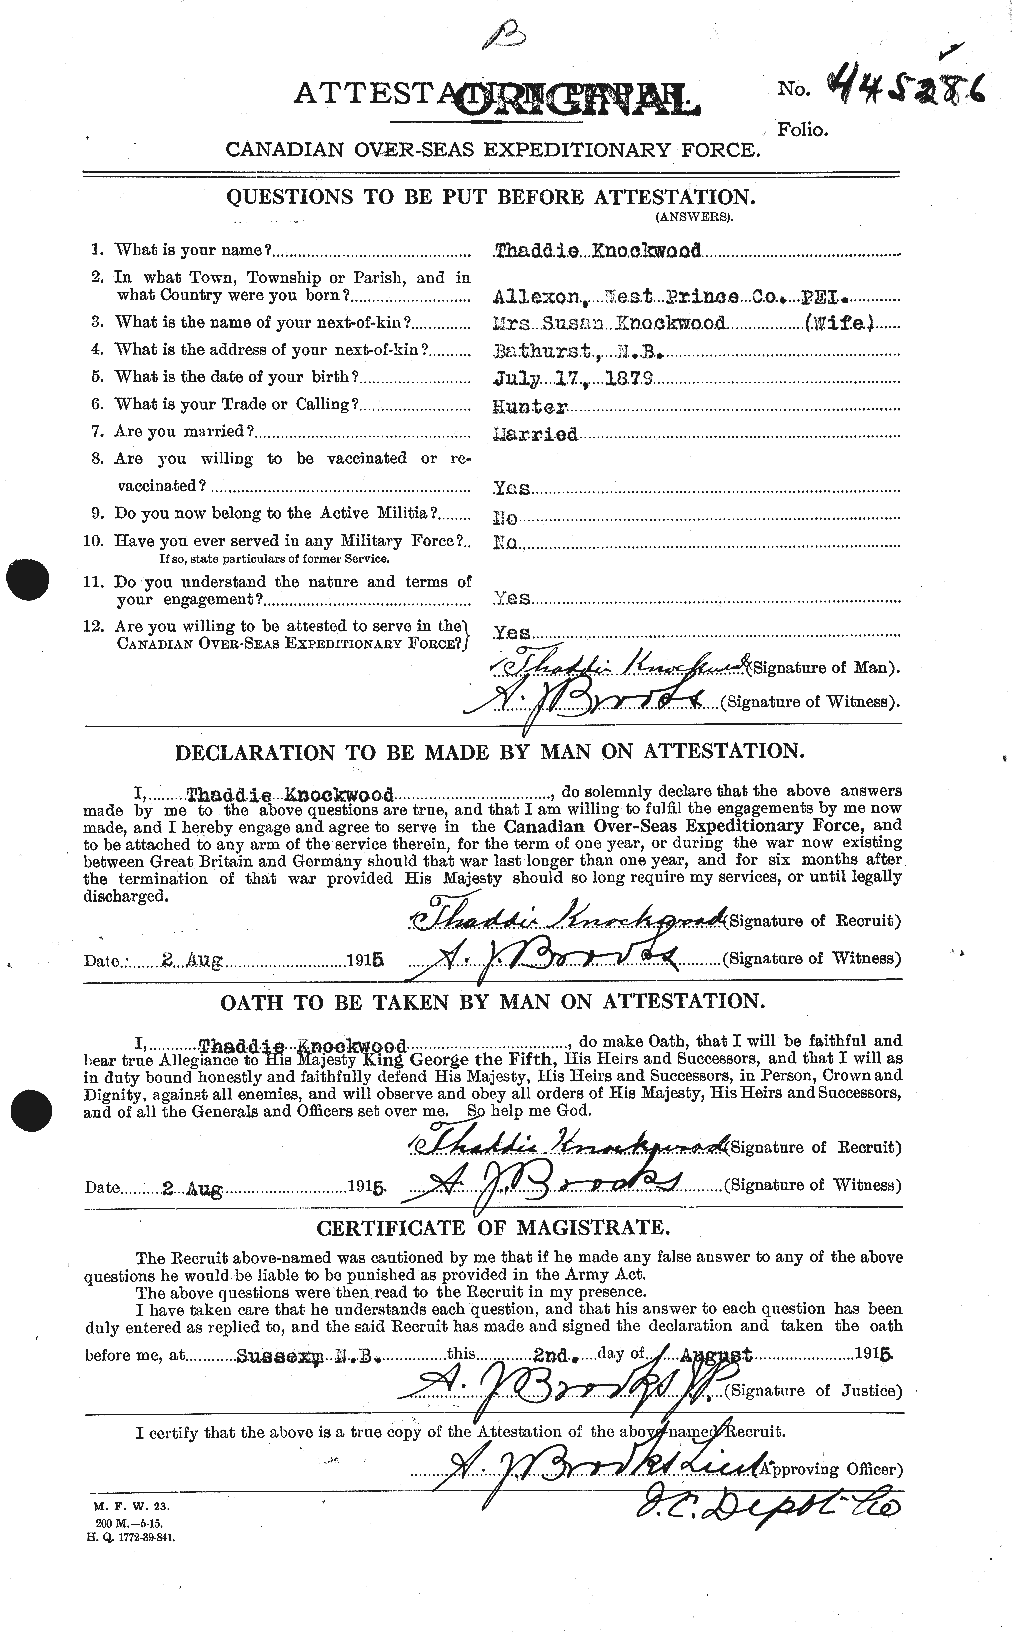 Personnel Records of the First World War - CEF 440194a